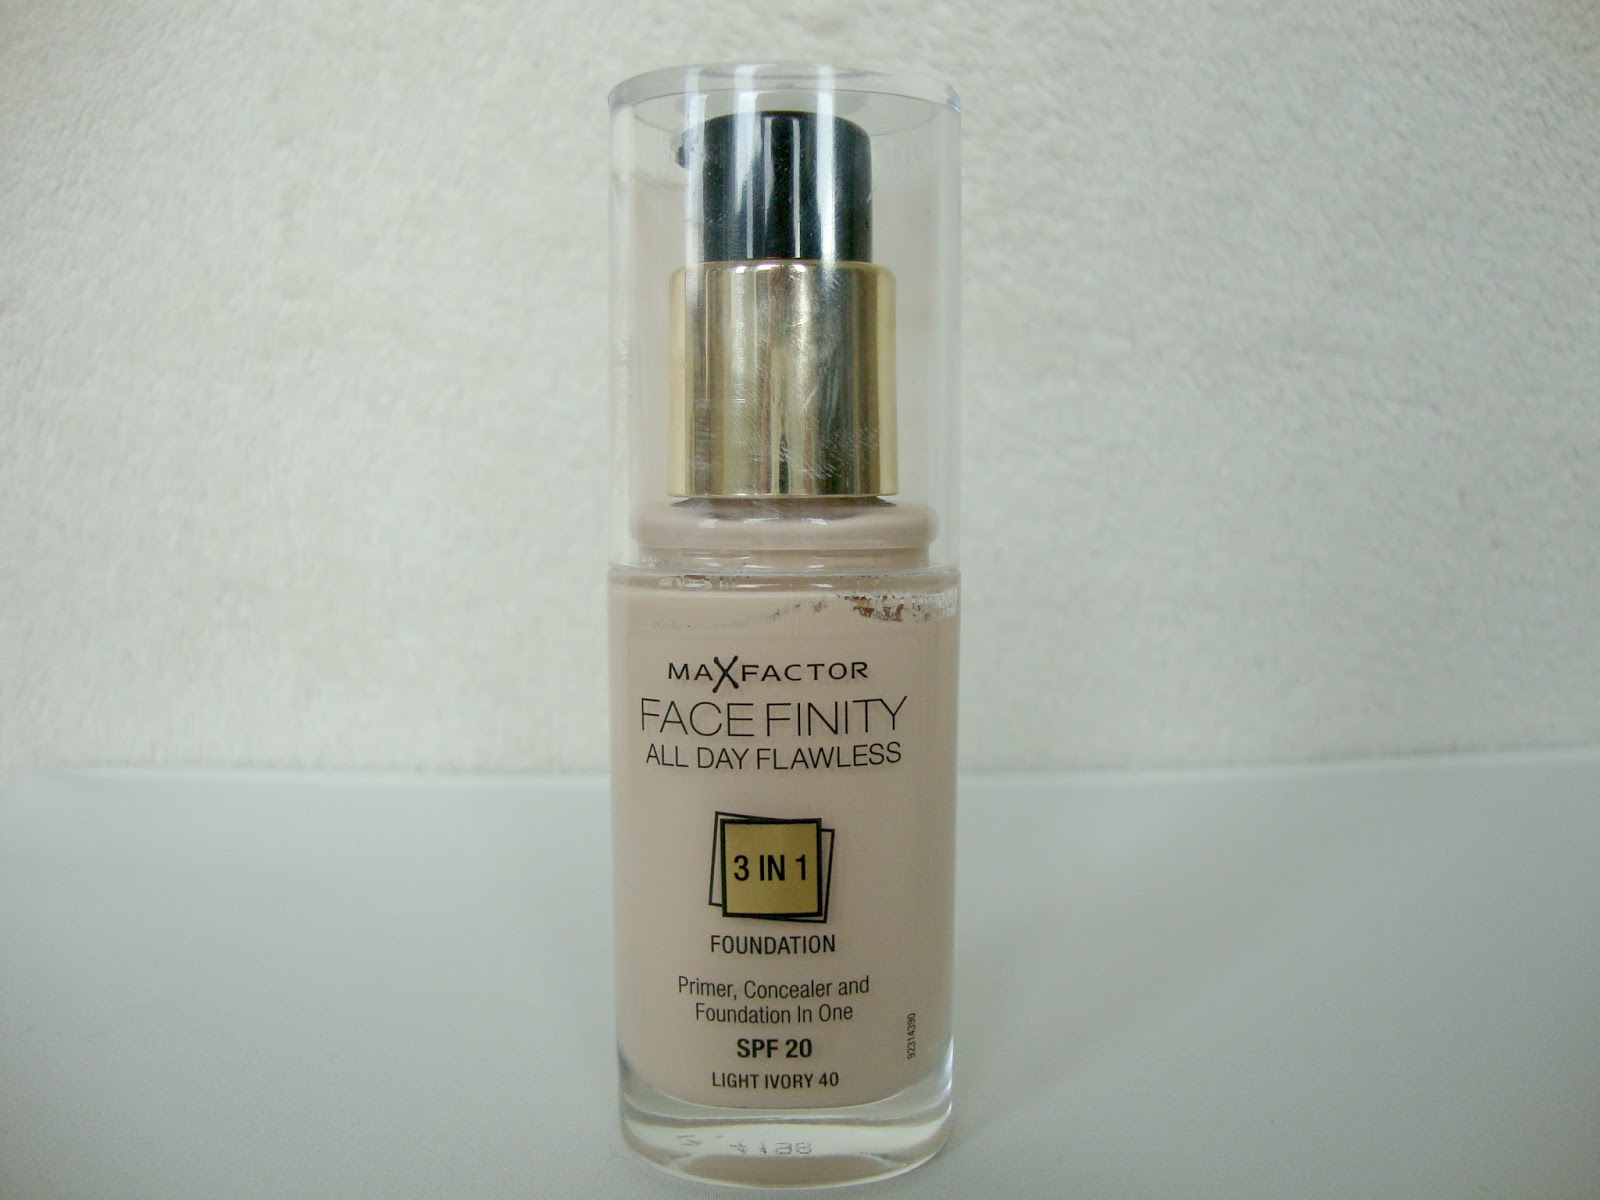 All Flawless Day Facefinity Alice | Anne Foundation Maxfactor